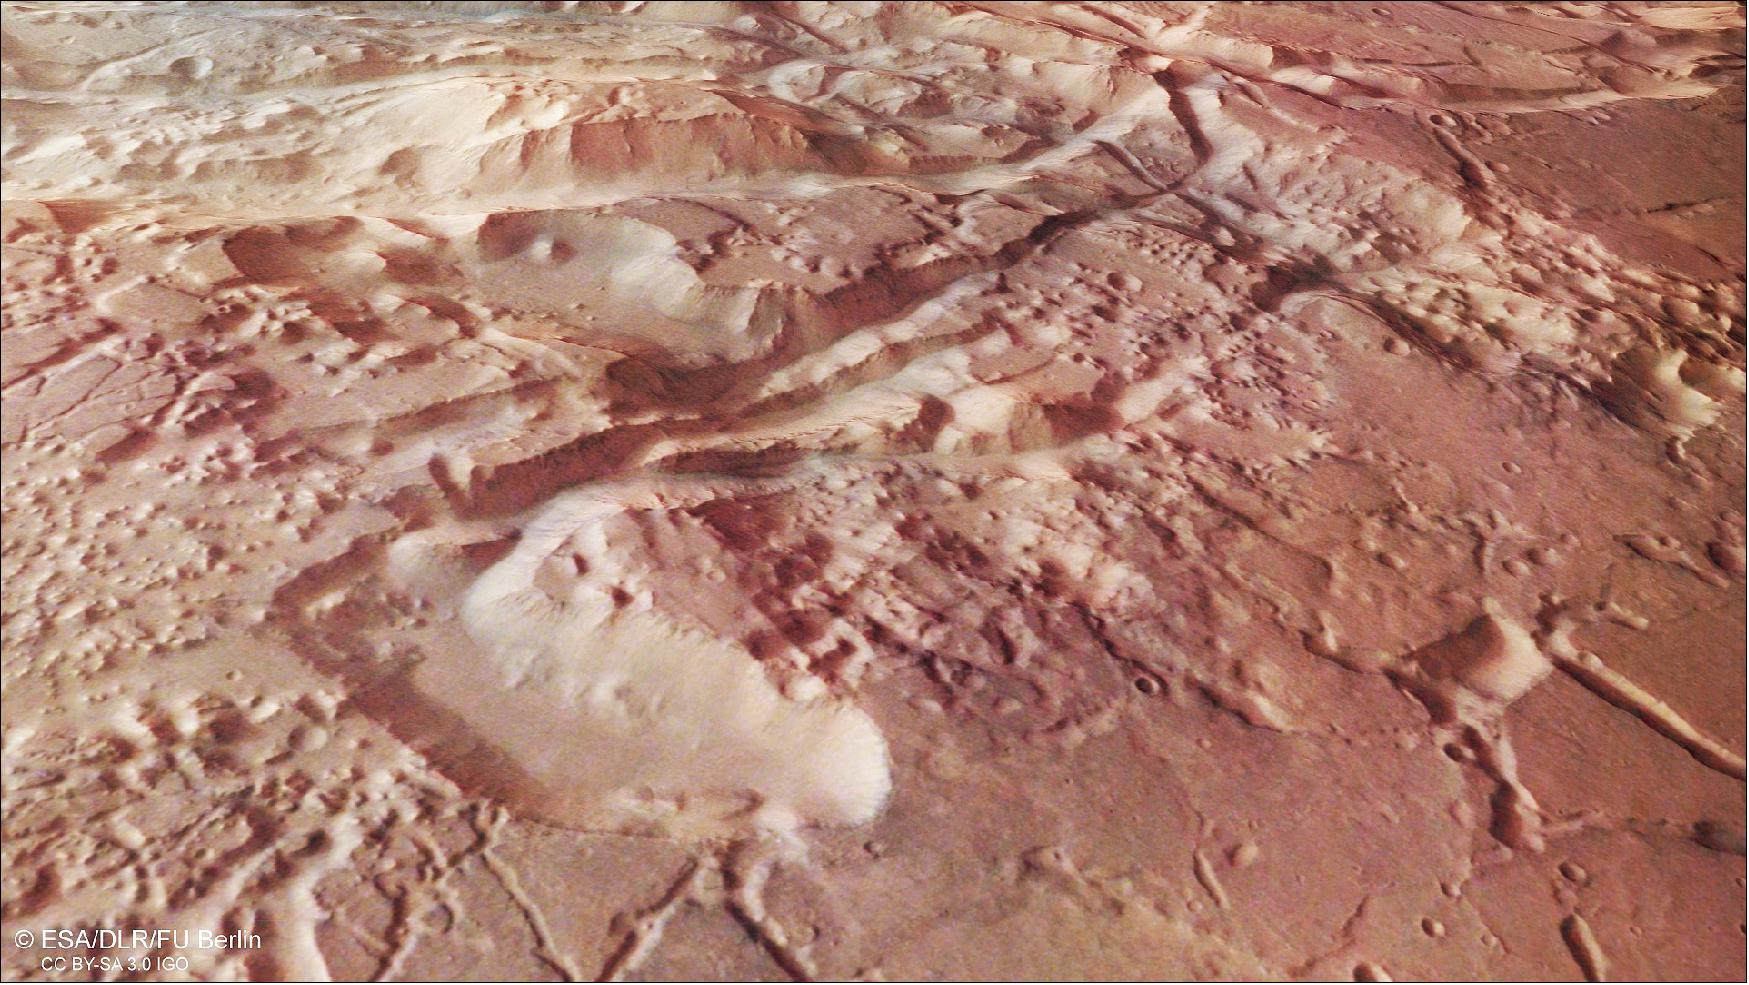 Figure 32: Perspective view of Aurorae Chaos. This image from ESA's Mars Express shows Aurorae Chaos, a large area of chaotic terrain located in the Margaritifer Terra region on Mars. This oblique perspective view was generated using a digital terrain model and Mars Express data gathered on 31 October 2018 during orbit 18765. The ground resolution is approximately 14 m/pixel and the images are centered at about 327ºE/11ºS. This image was created using data from the nadir and color channels of the High Resolution Stereo Camera. The nadir channel is aligned perpendicular to the surface of Mars, as if looking straight down at the surface (image credit: ESA/DLR/FU Berlin, CC BY-SA 3.0 IGO)